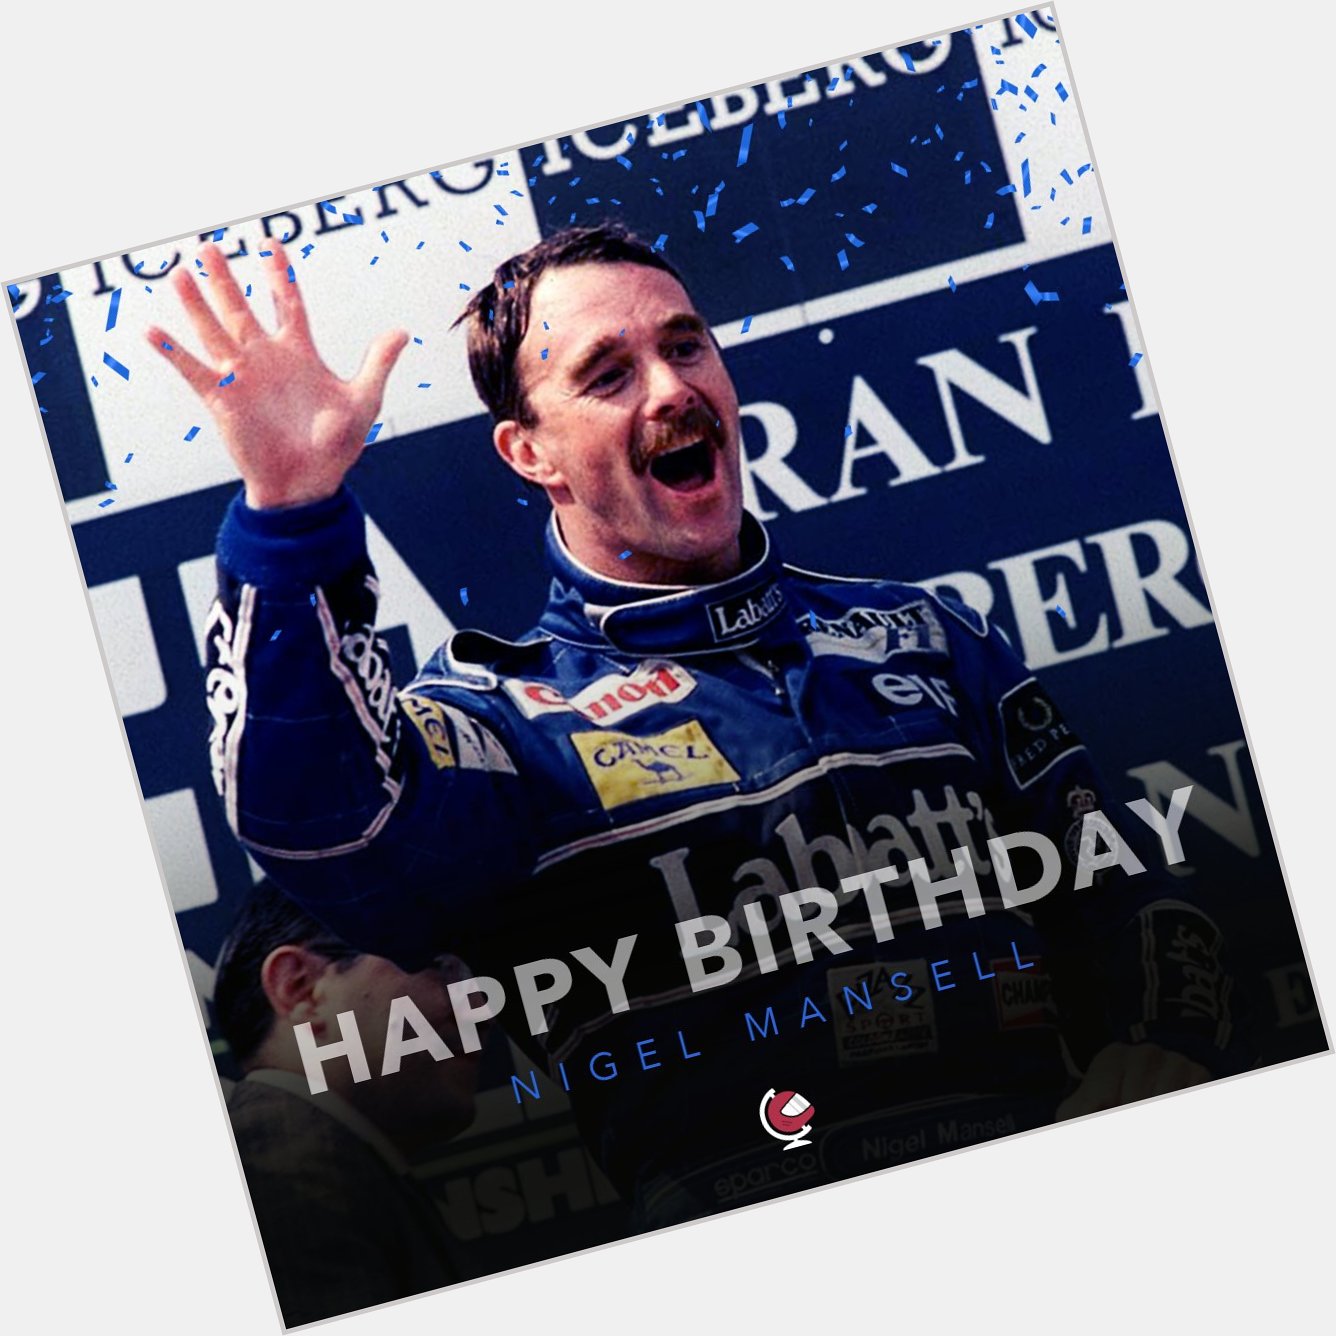 A big Happy Birthday to the one and only Nigel Mansell! 